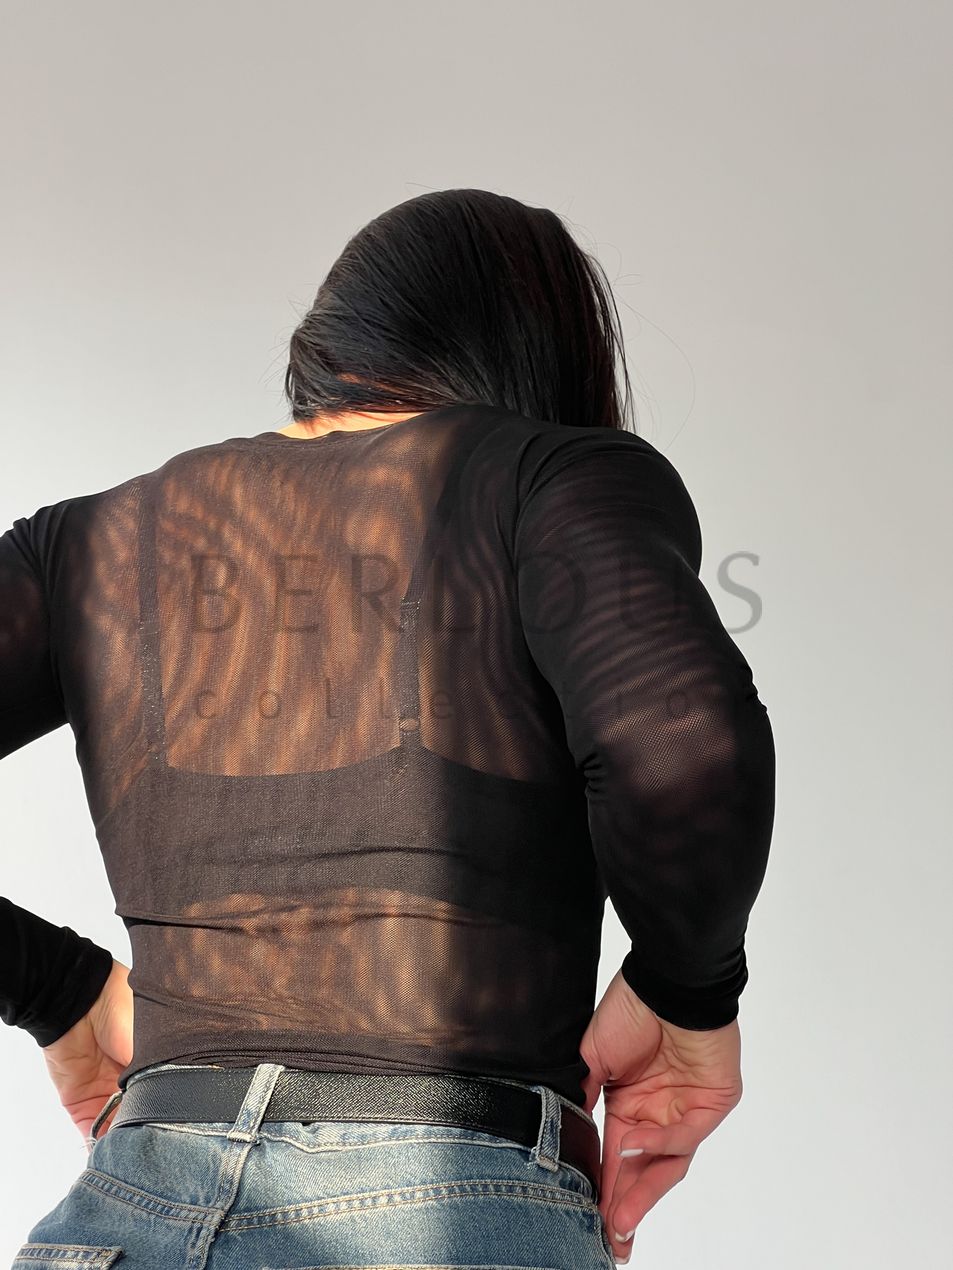 LONGSLEEVE, collection SHADOW, Mesh, Black, L